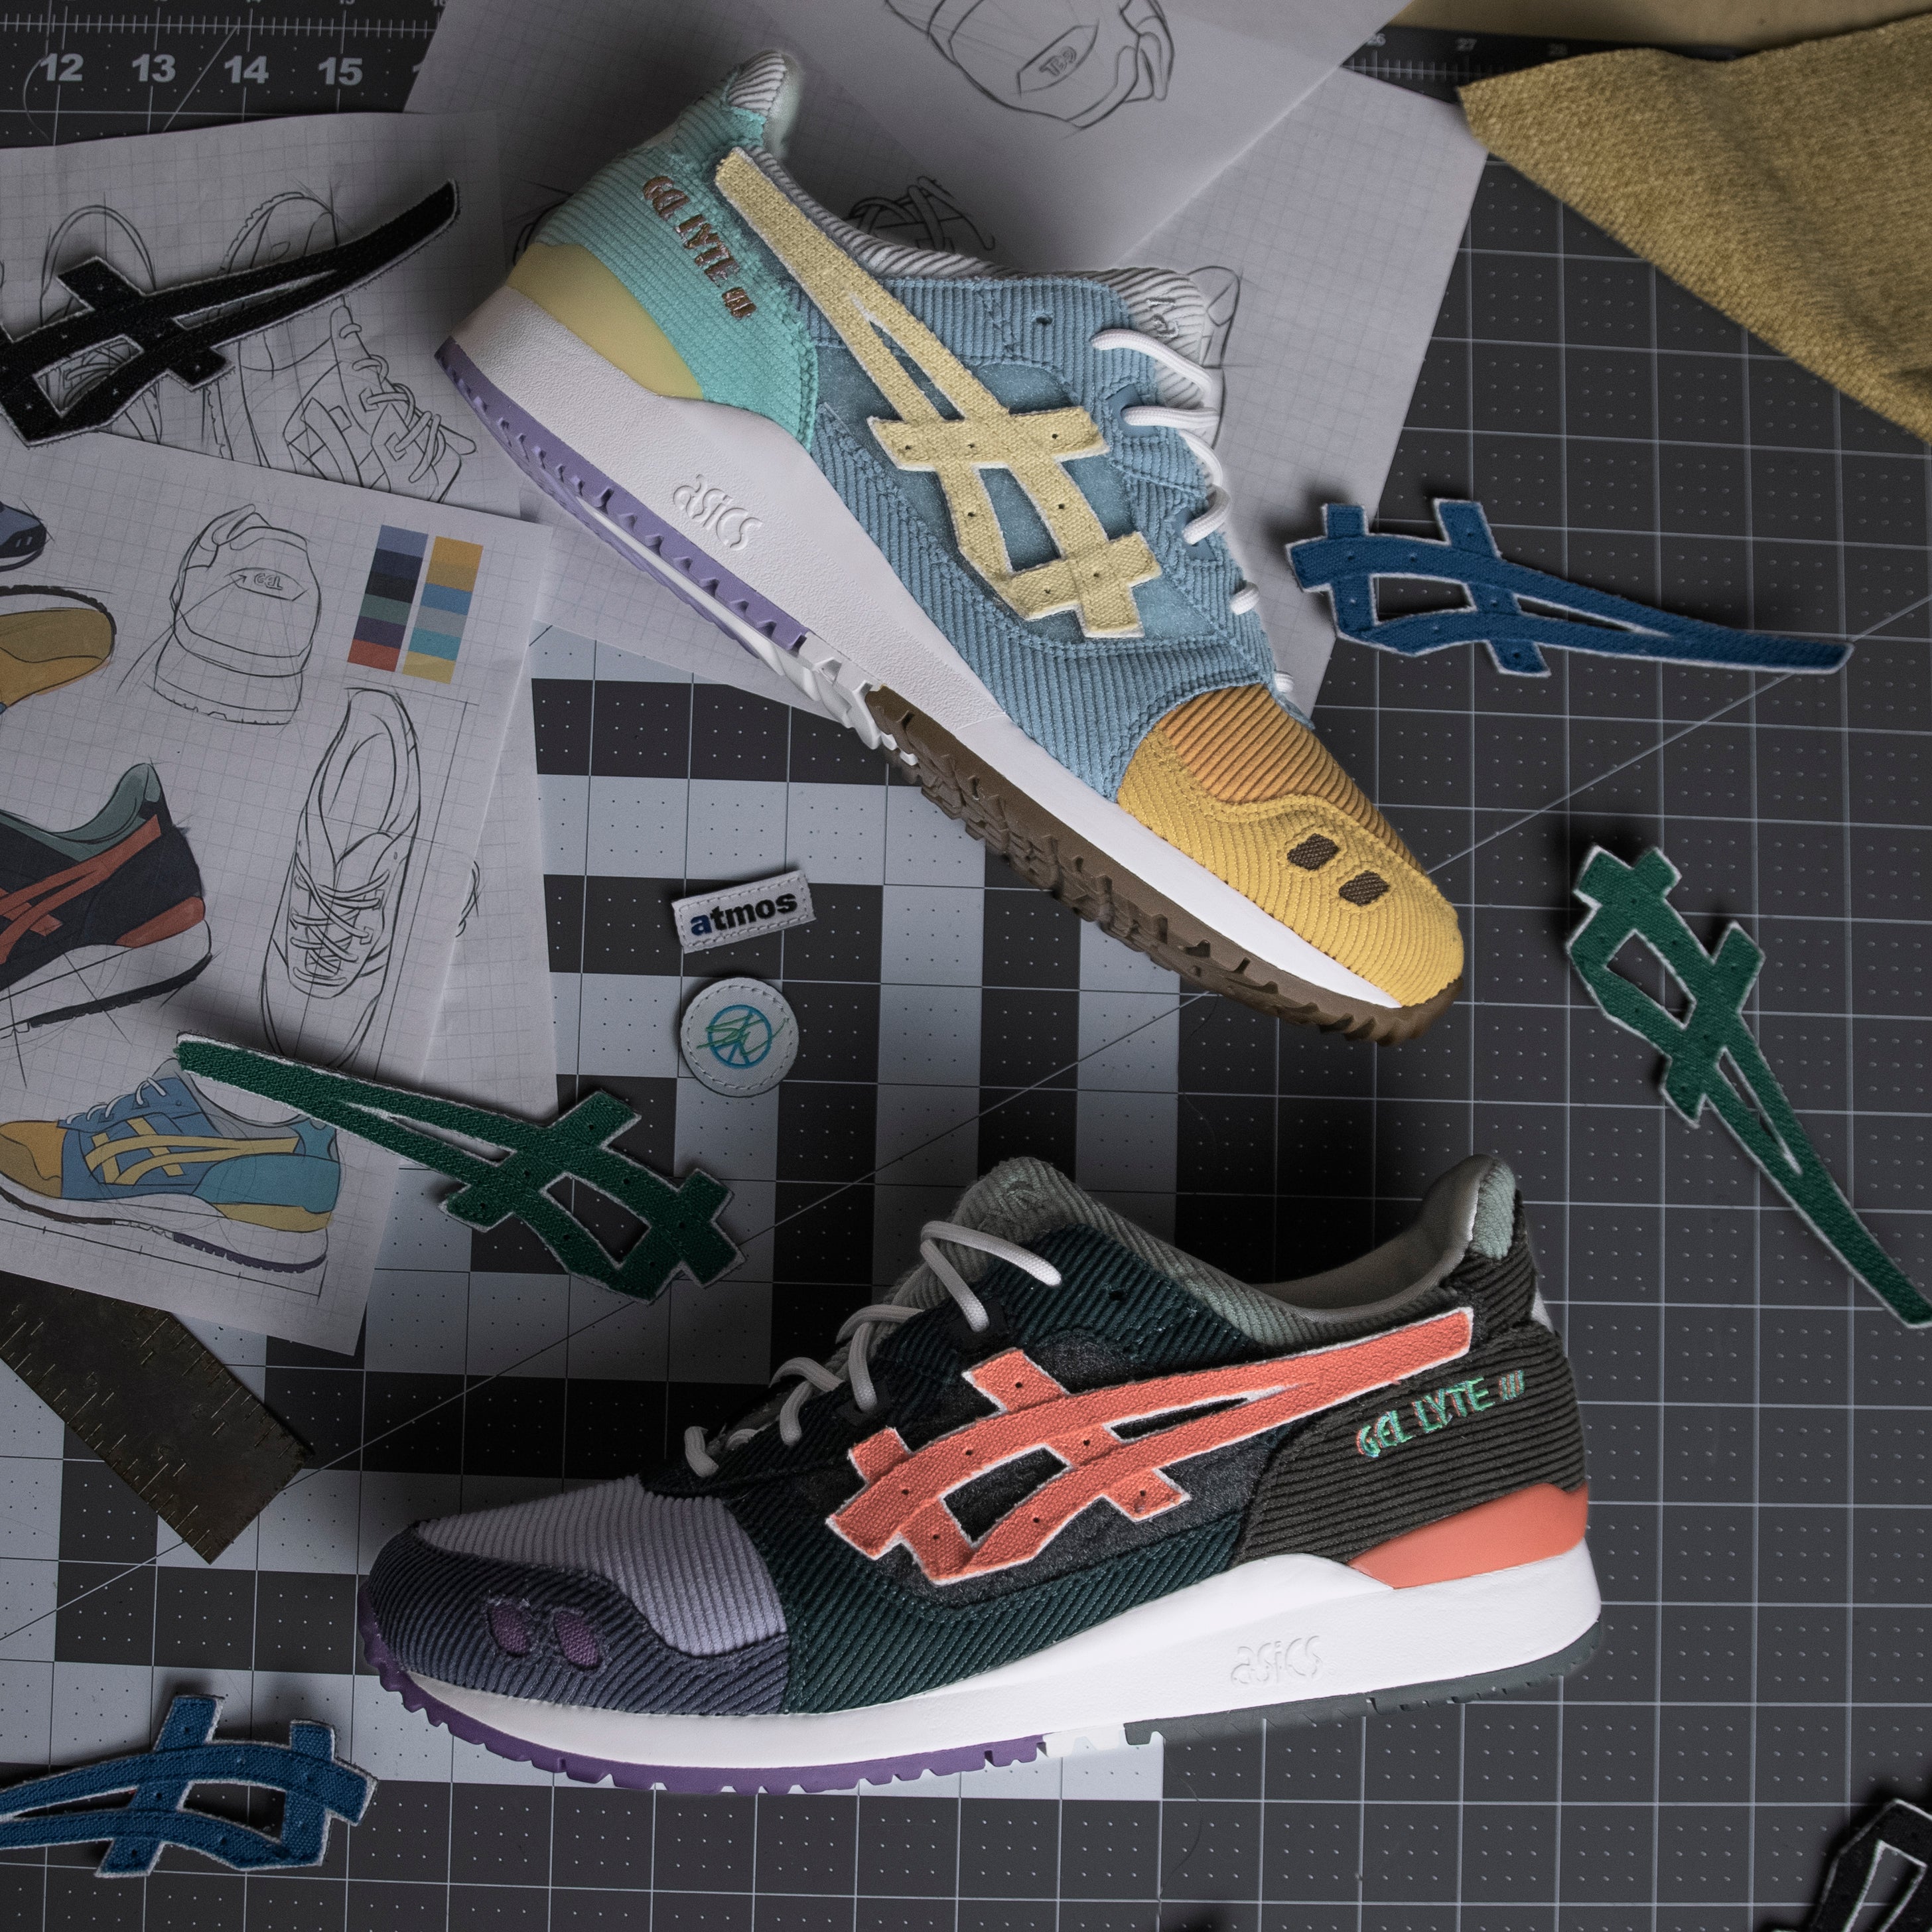 Asics x Atmos x Sean Wotherspoon Gel Lyte III article image